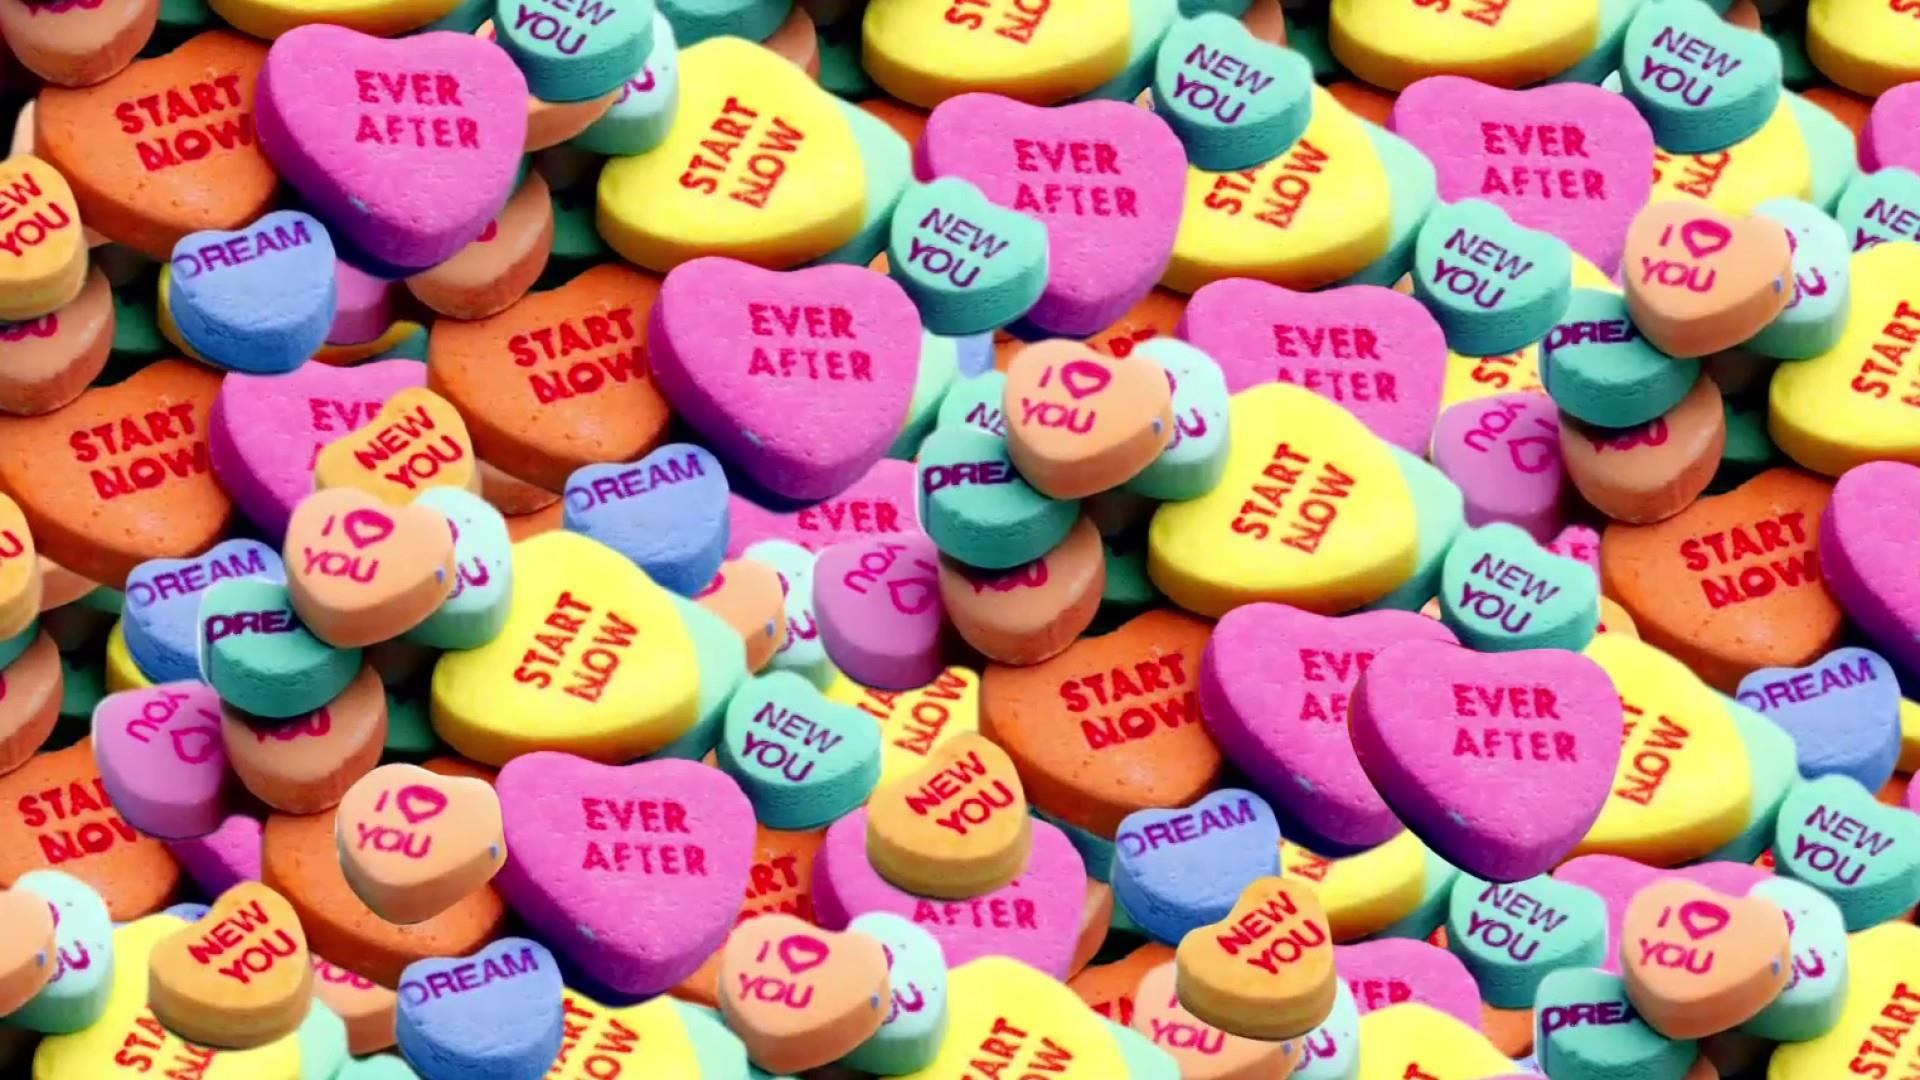 Conversation Hearts Are The Superior Valentine's Day Candy